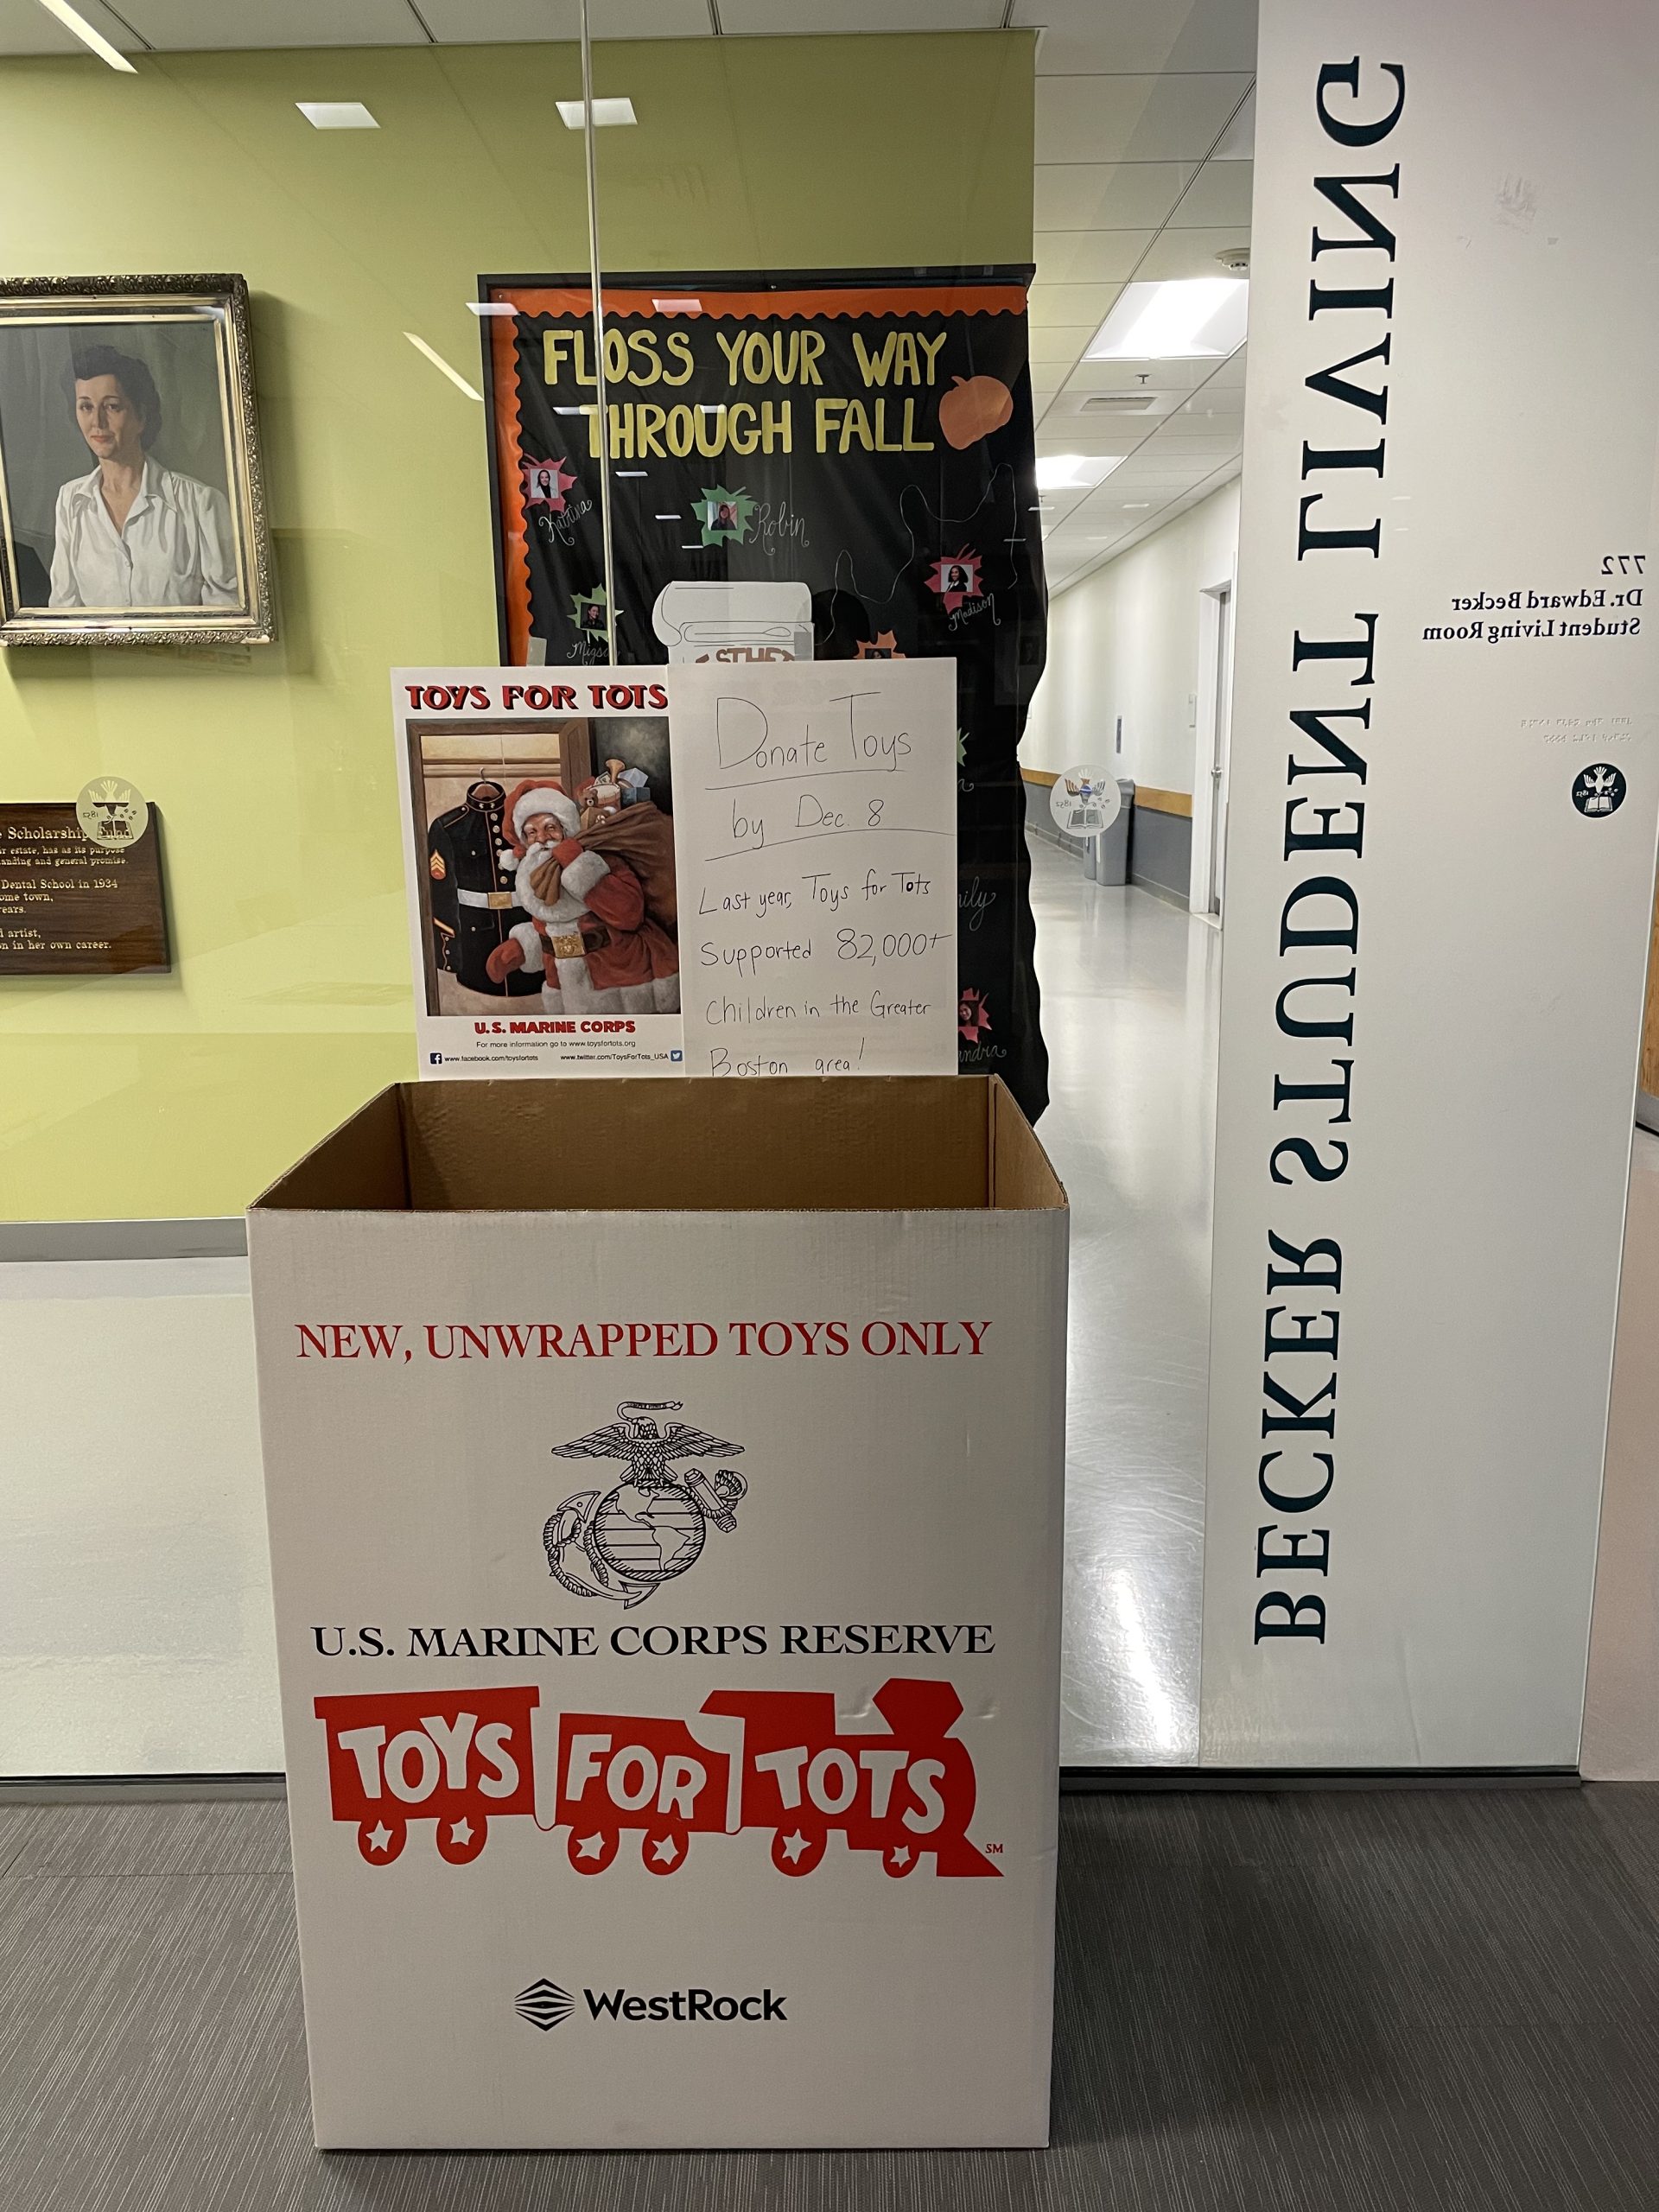 Toys For Tots Collection Box Tufts